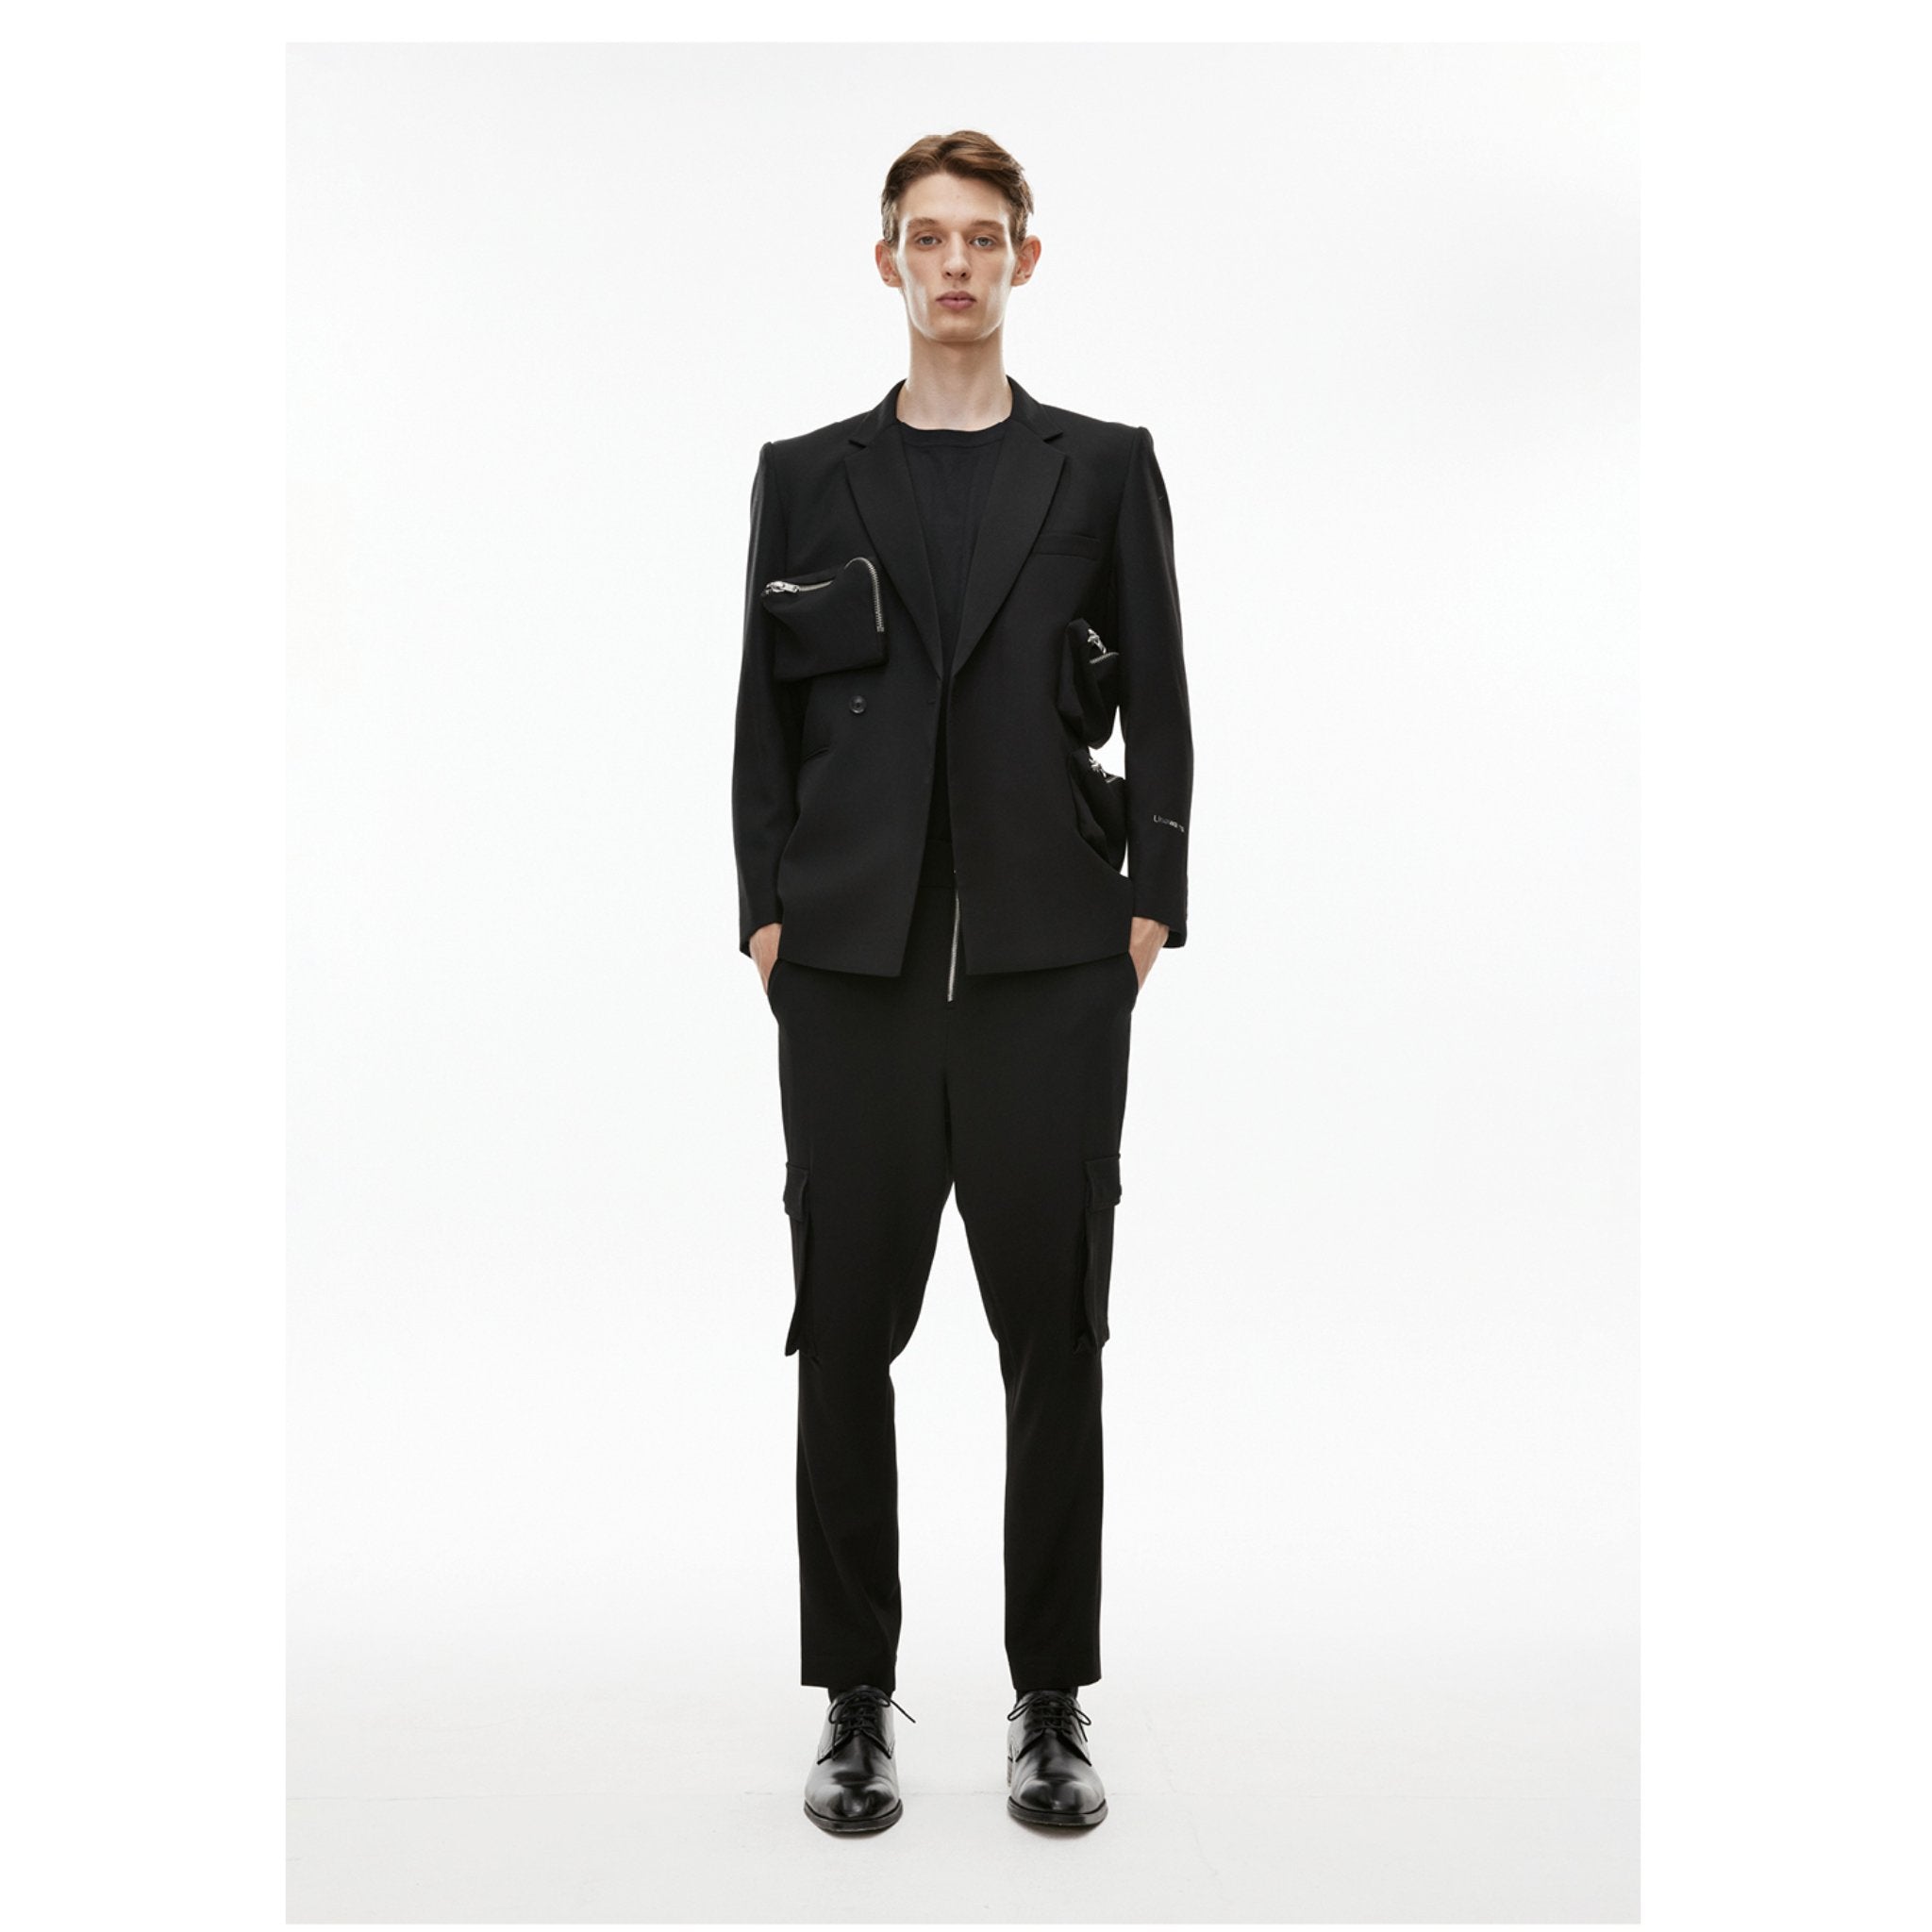 Unawares Military Multi-Pocket Double Breasted Suit Black | MADA IN CHINA